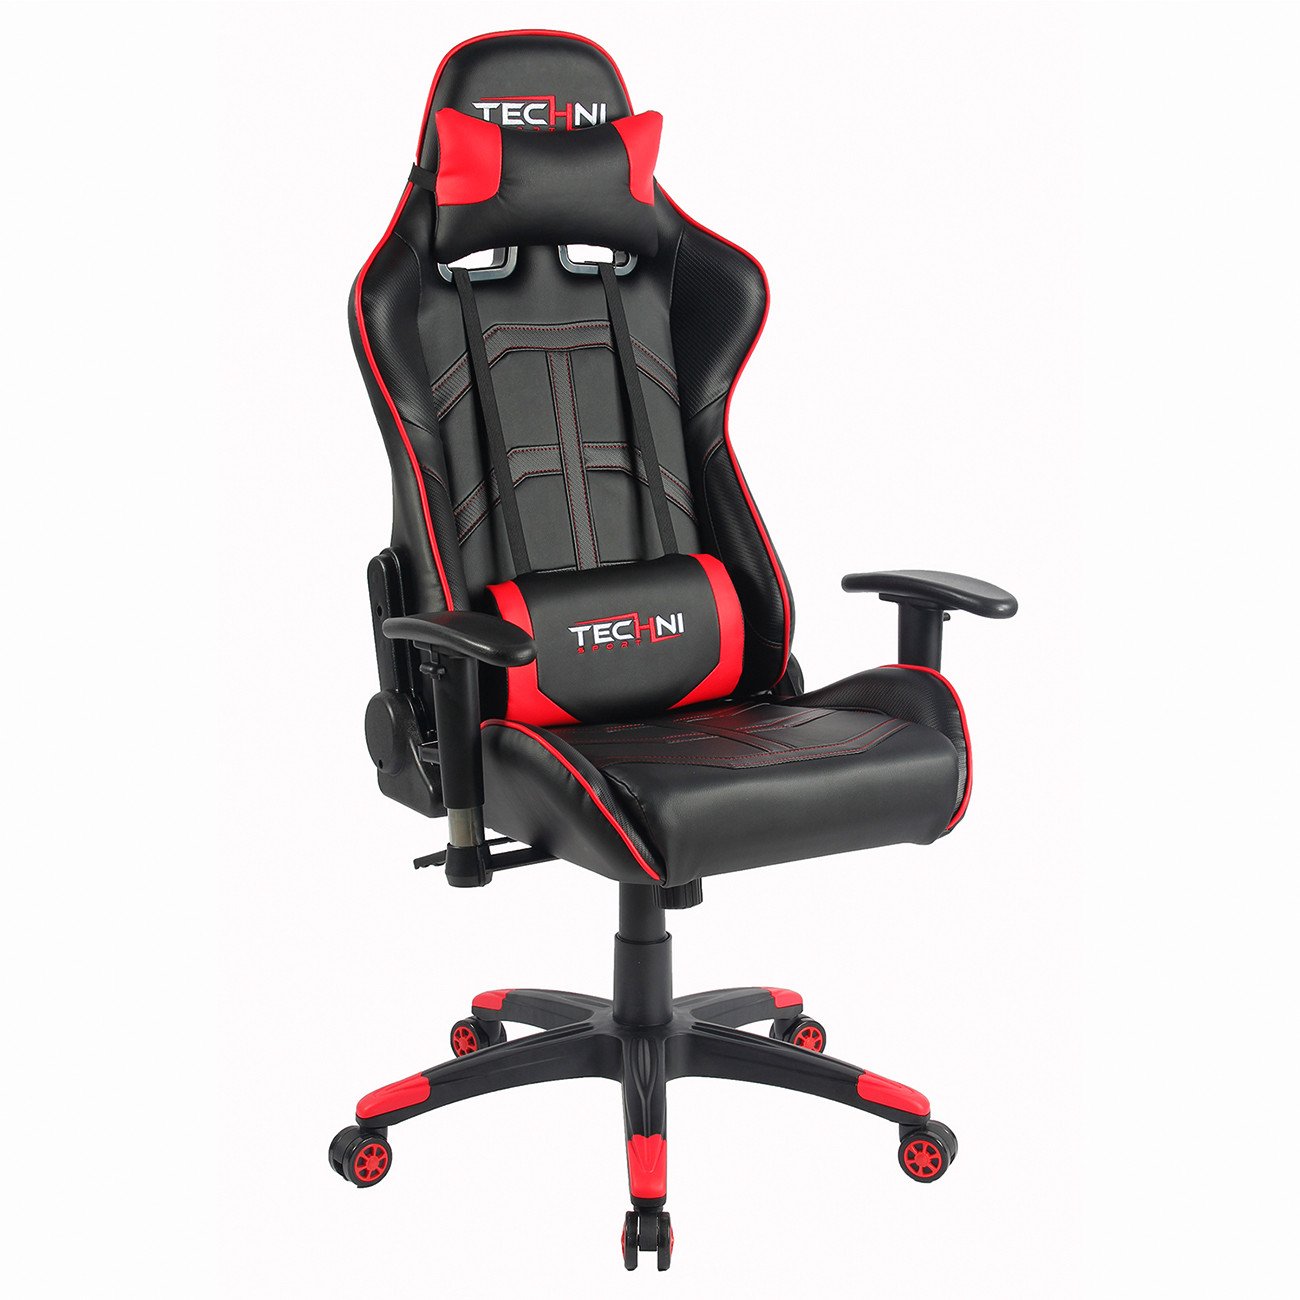 Techni Sport Rta-ts49-red Office-pc Gaming Chair. Color: Red